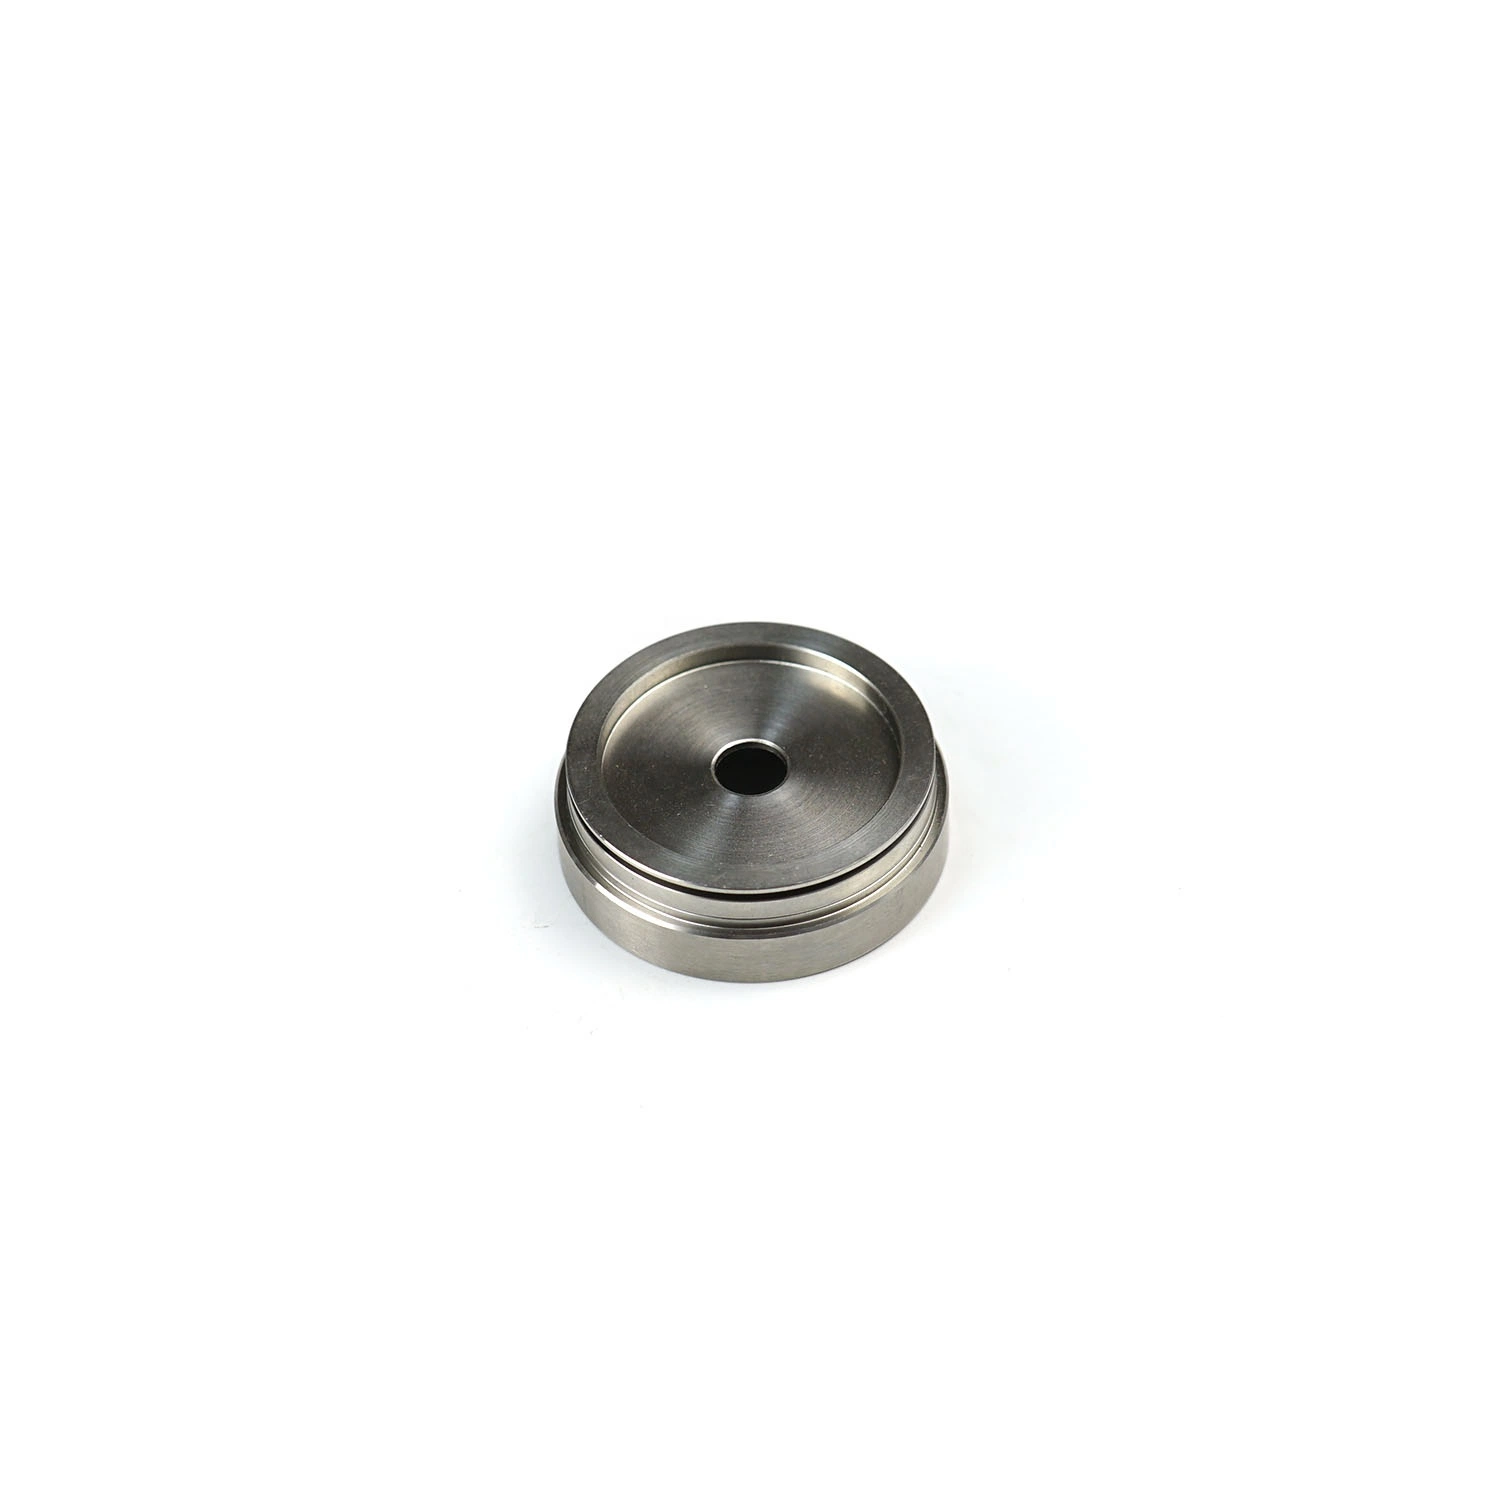 Dongguan Customized Perforated Knob Cover Cap Precision CNC Machining Parts CNC Turning Stainless Steel 304 Rotary Knob